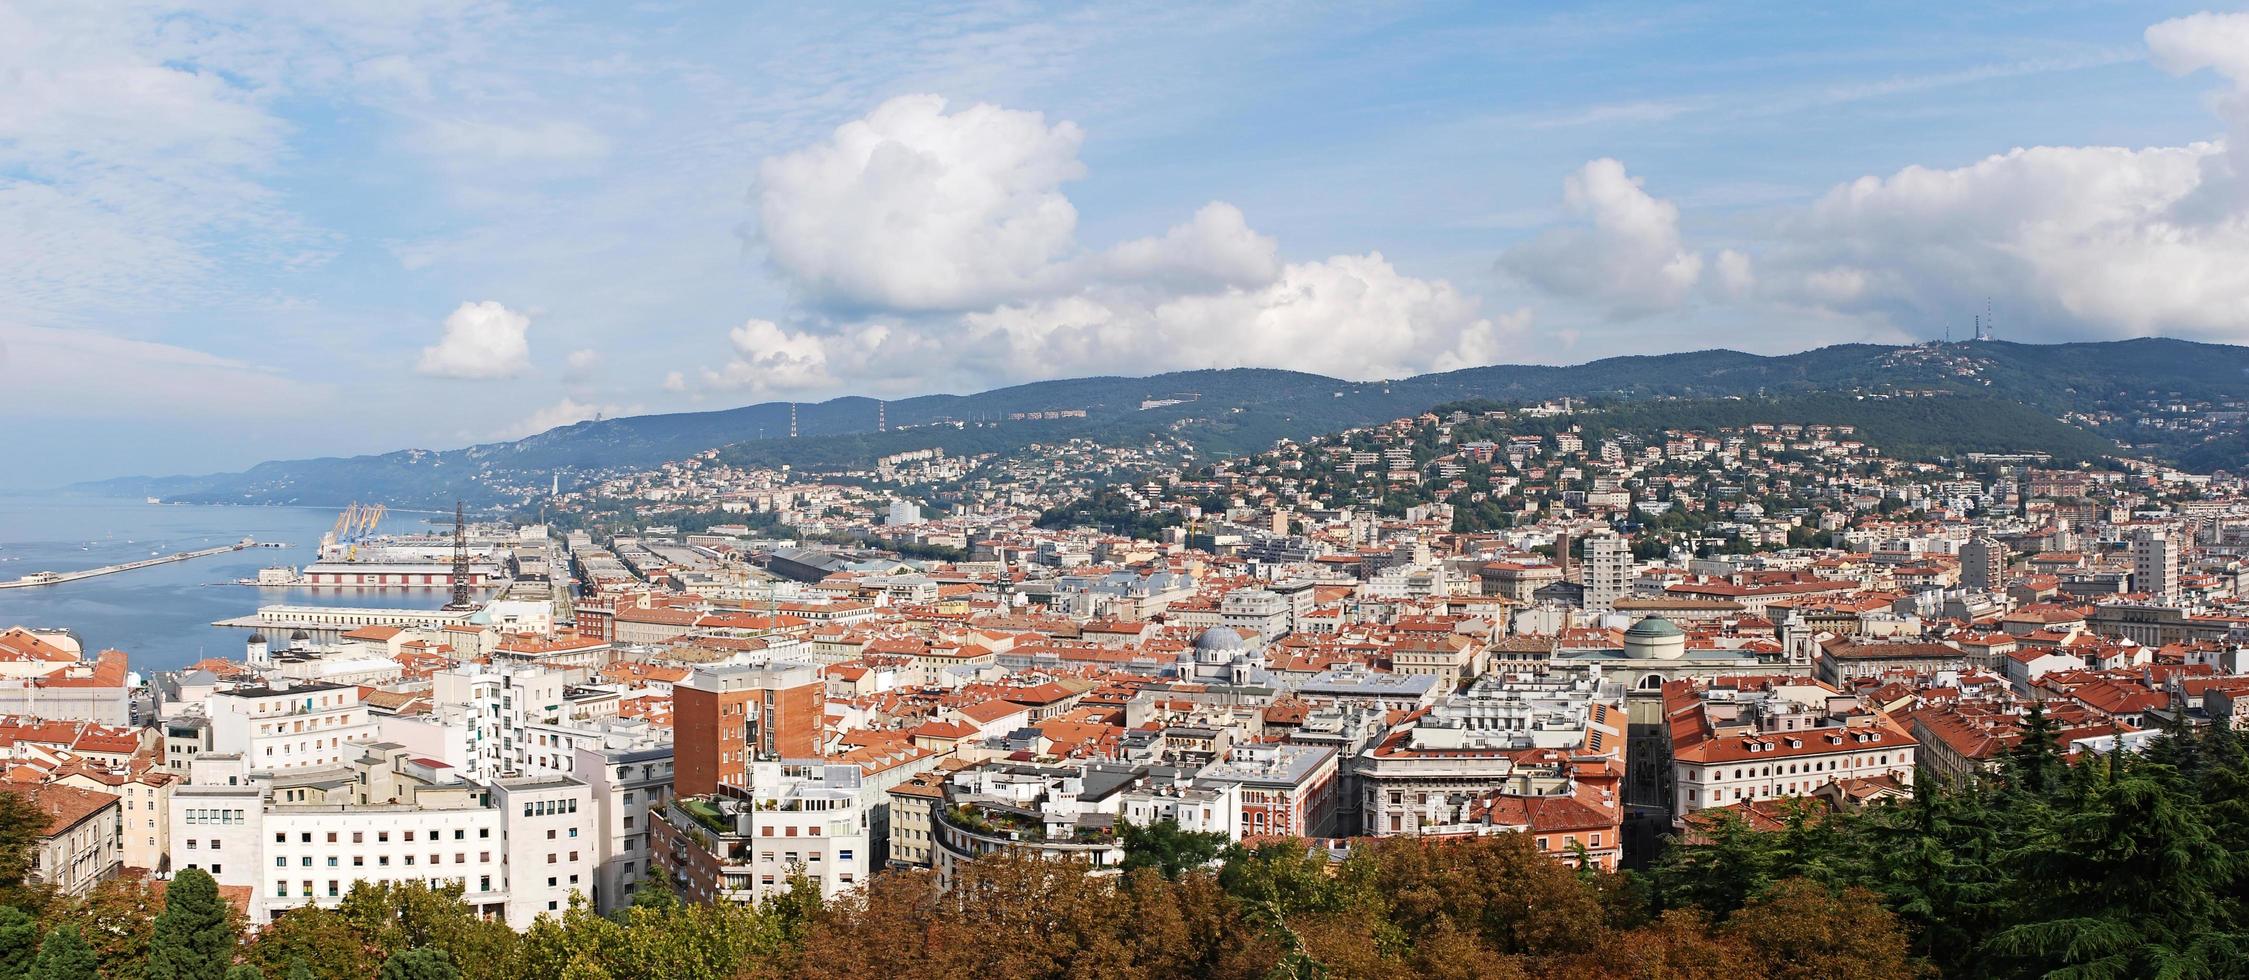 Landscape of Trieste. Panorama view of the port and the town of Trieste. Italy photo